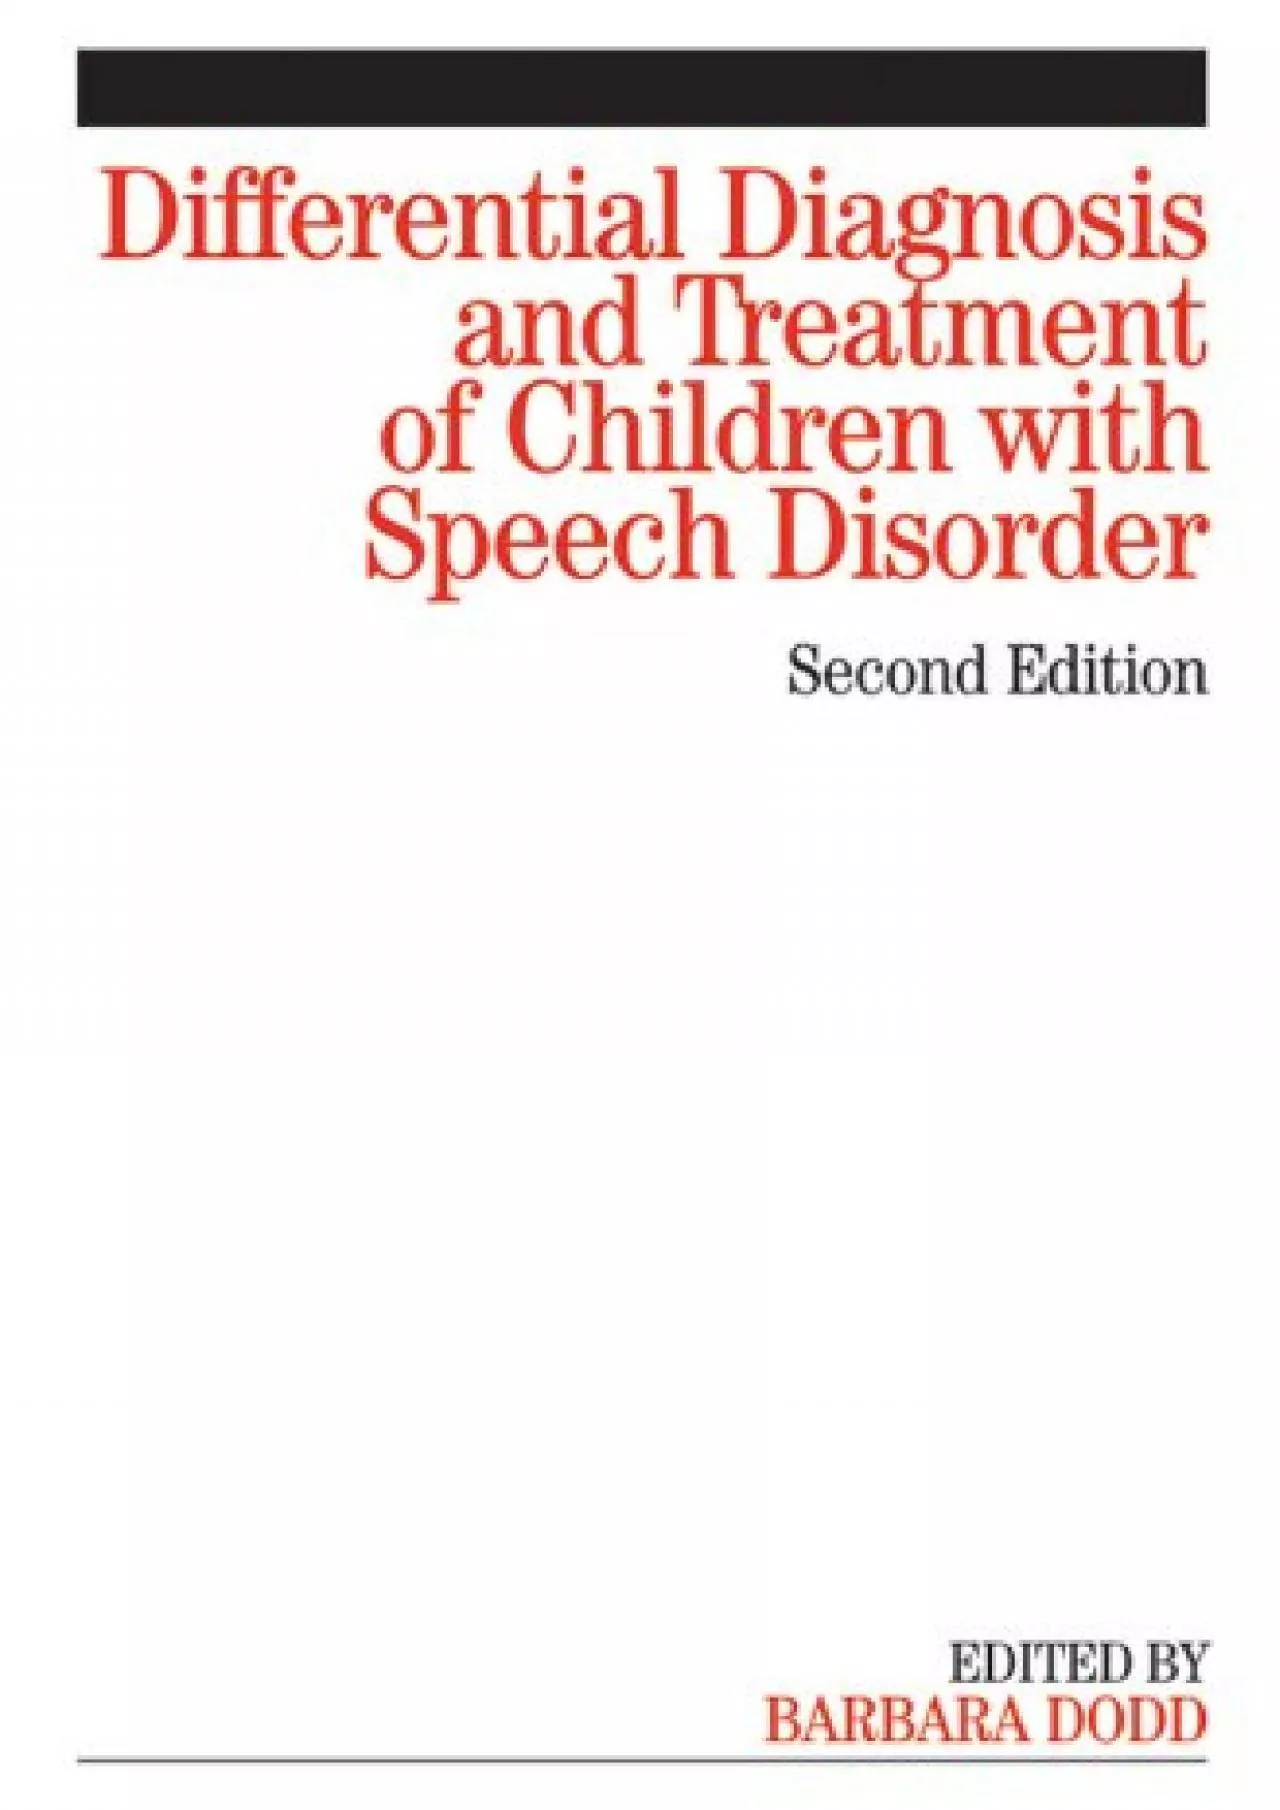 (BOOK)-Differential Diagnosis and Treatment of Children with Speech Disorder